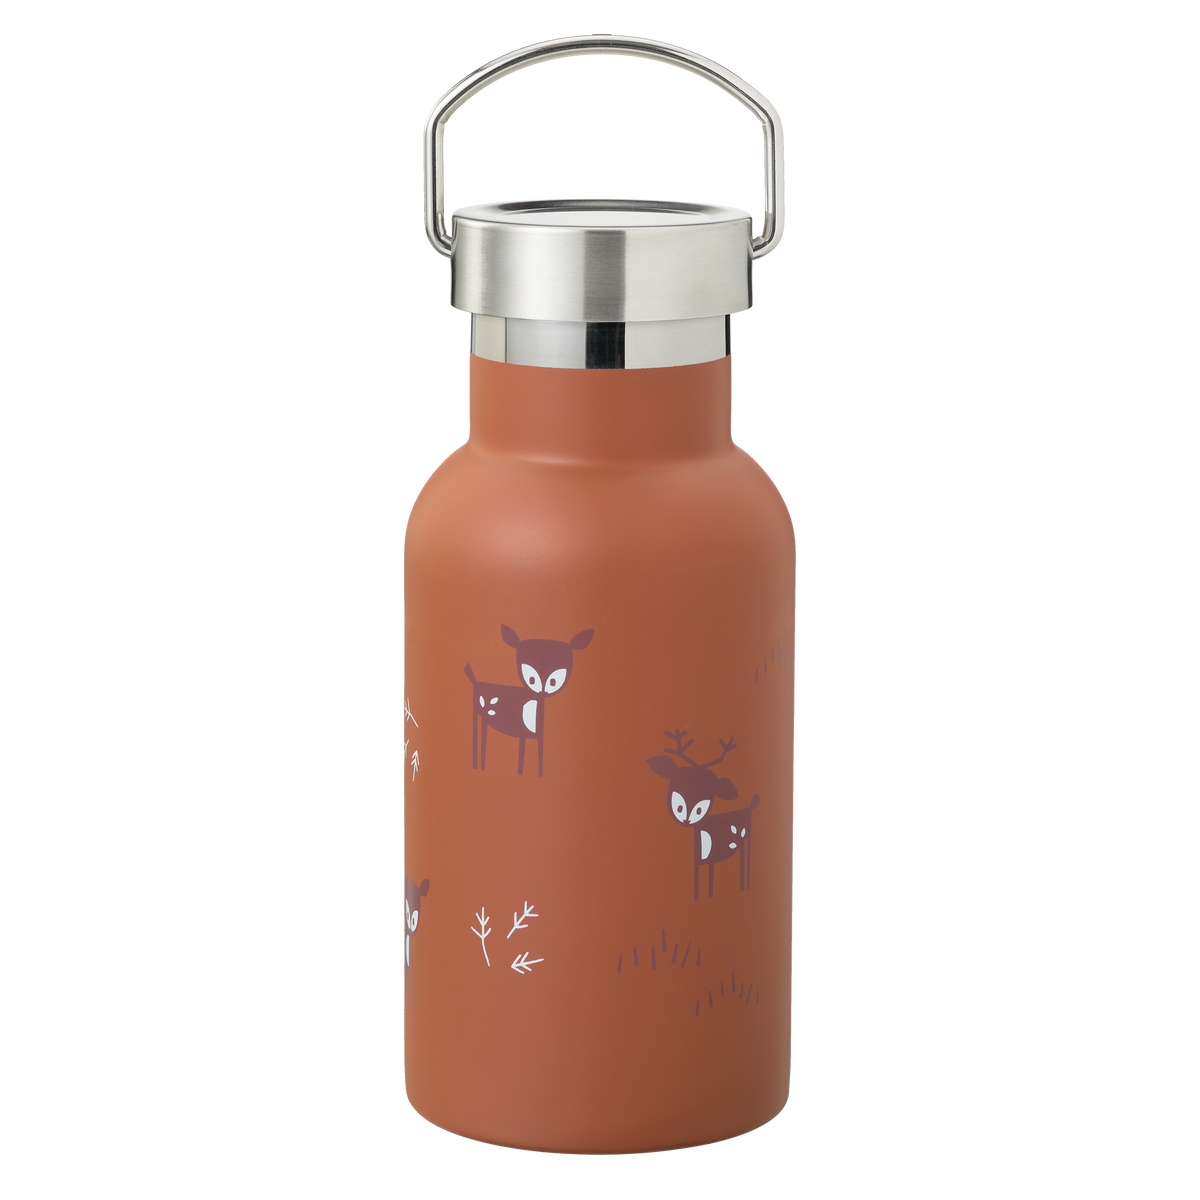 Thermosflasche 350 ml - amber brown